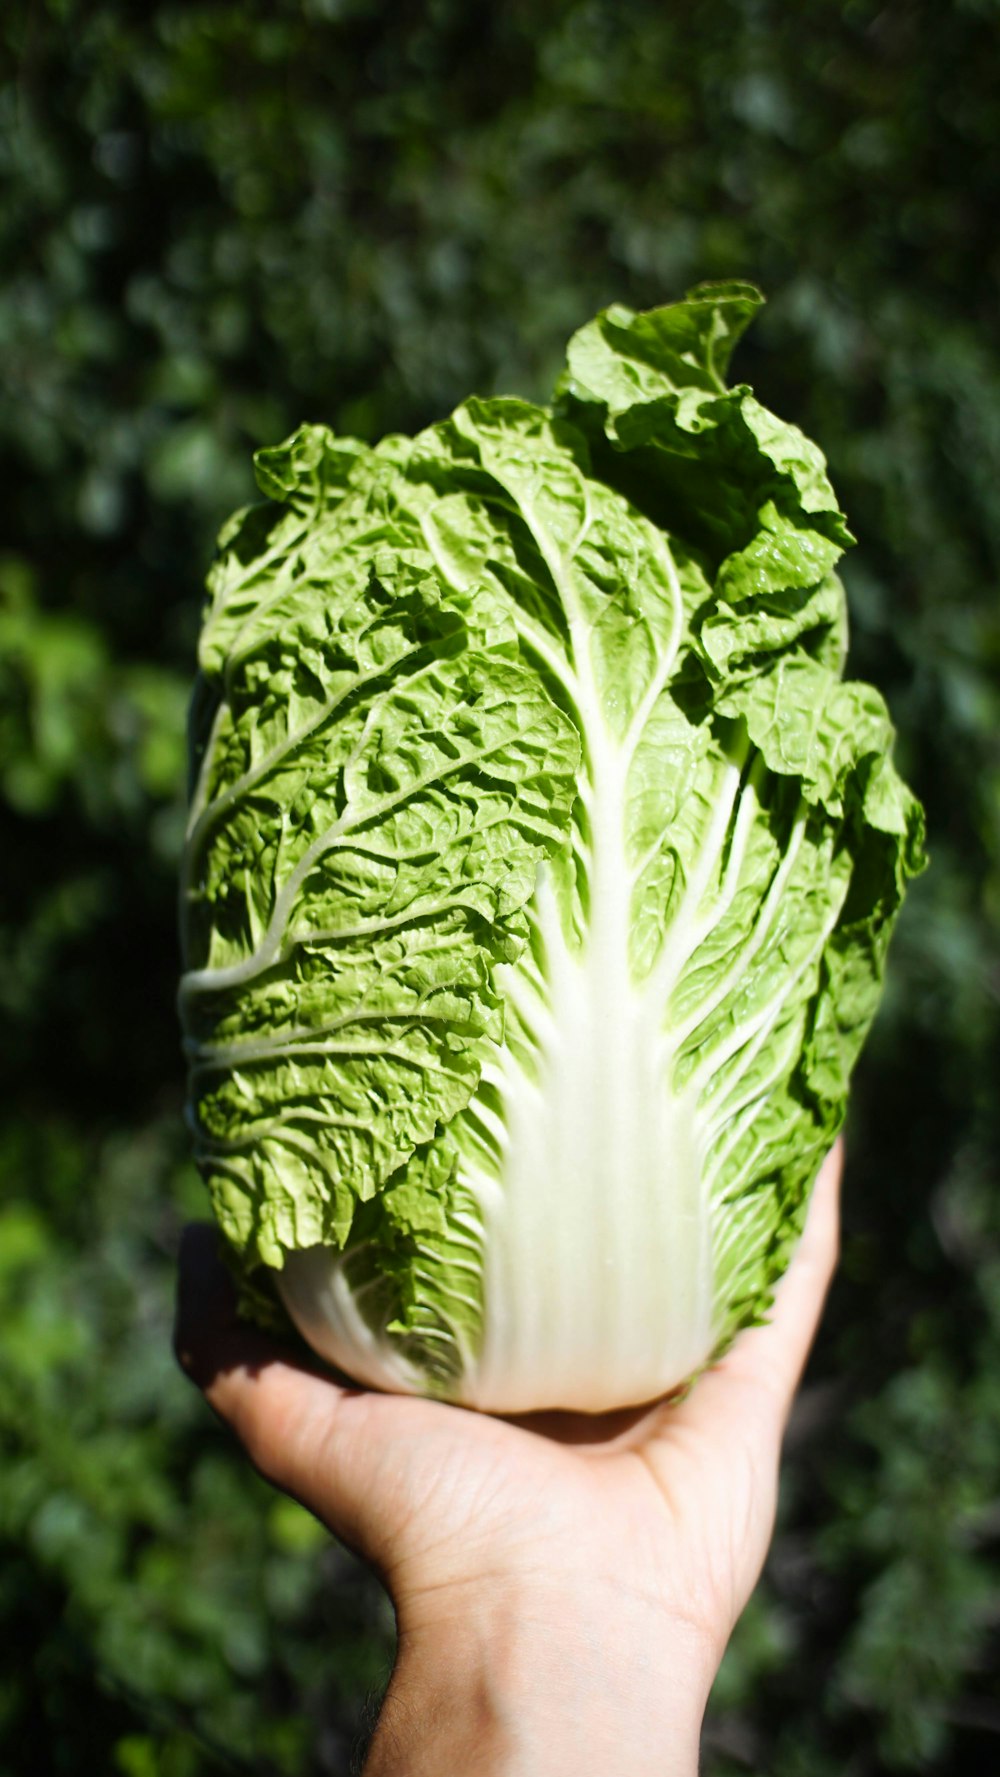 a hand holding a head of lettuce in front of trees